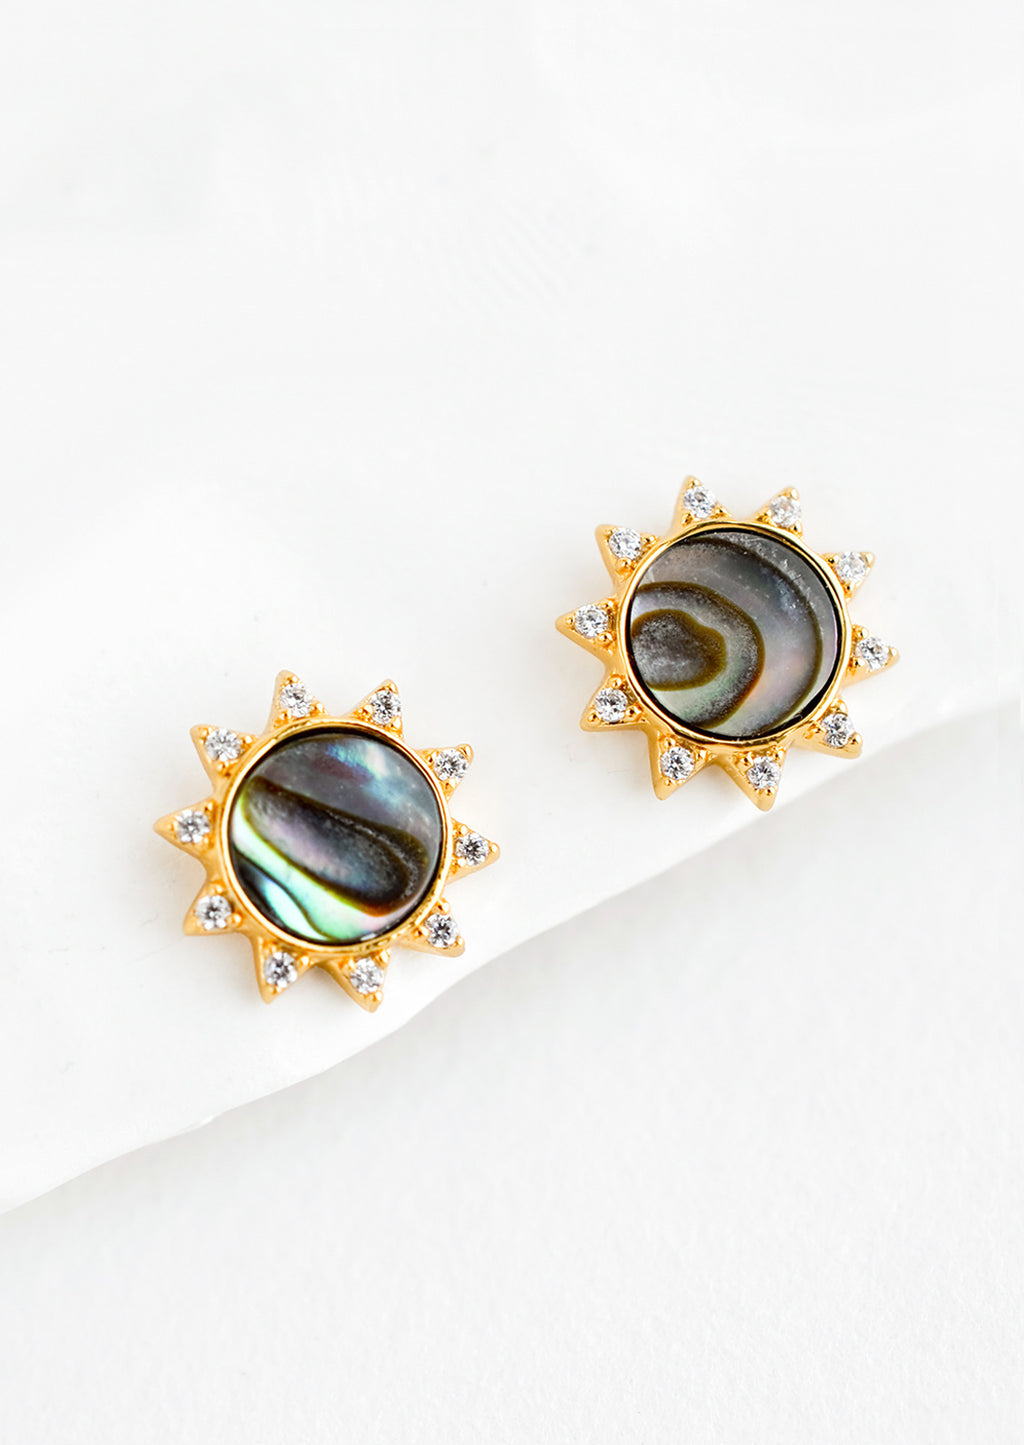 Abalone: A pair of gold stud earrings in the shape of a sun with shell inlay center and crystal "sunray" border.